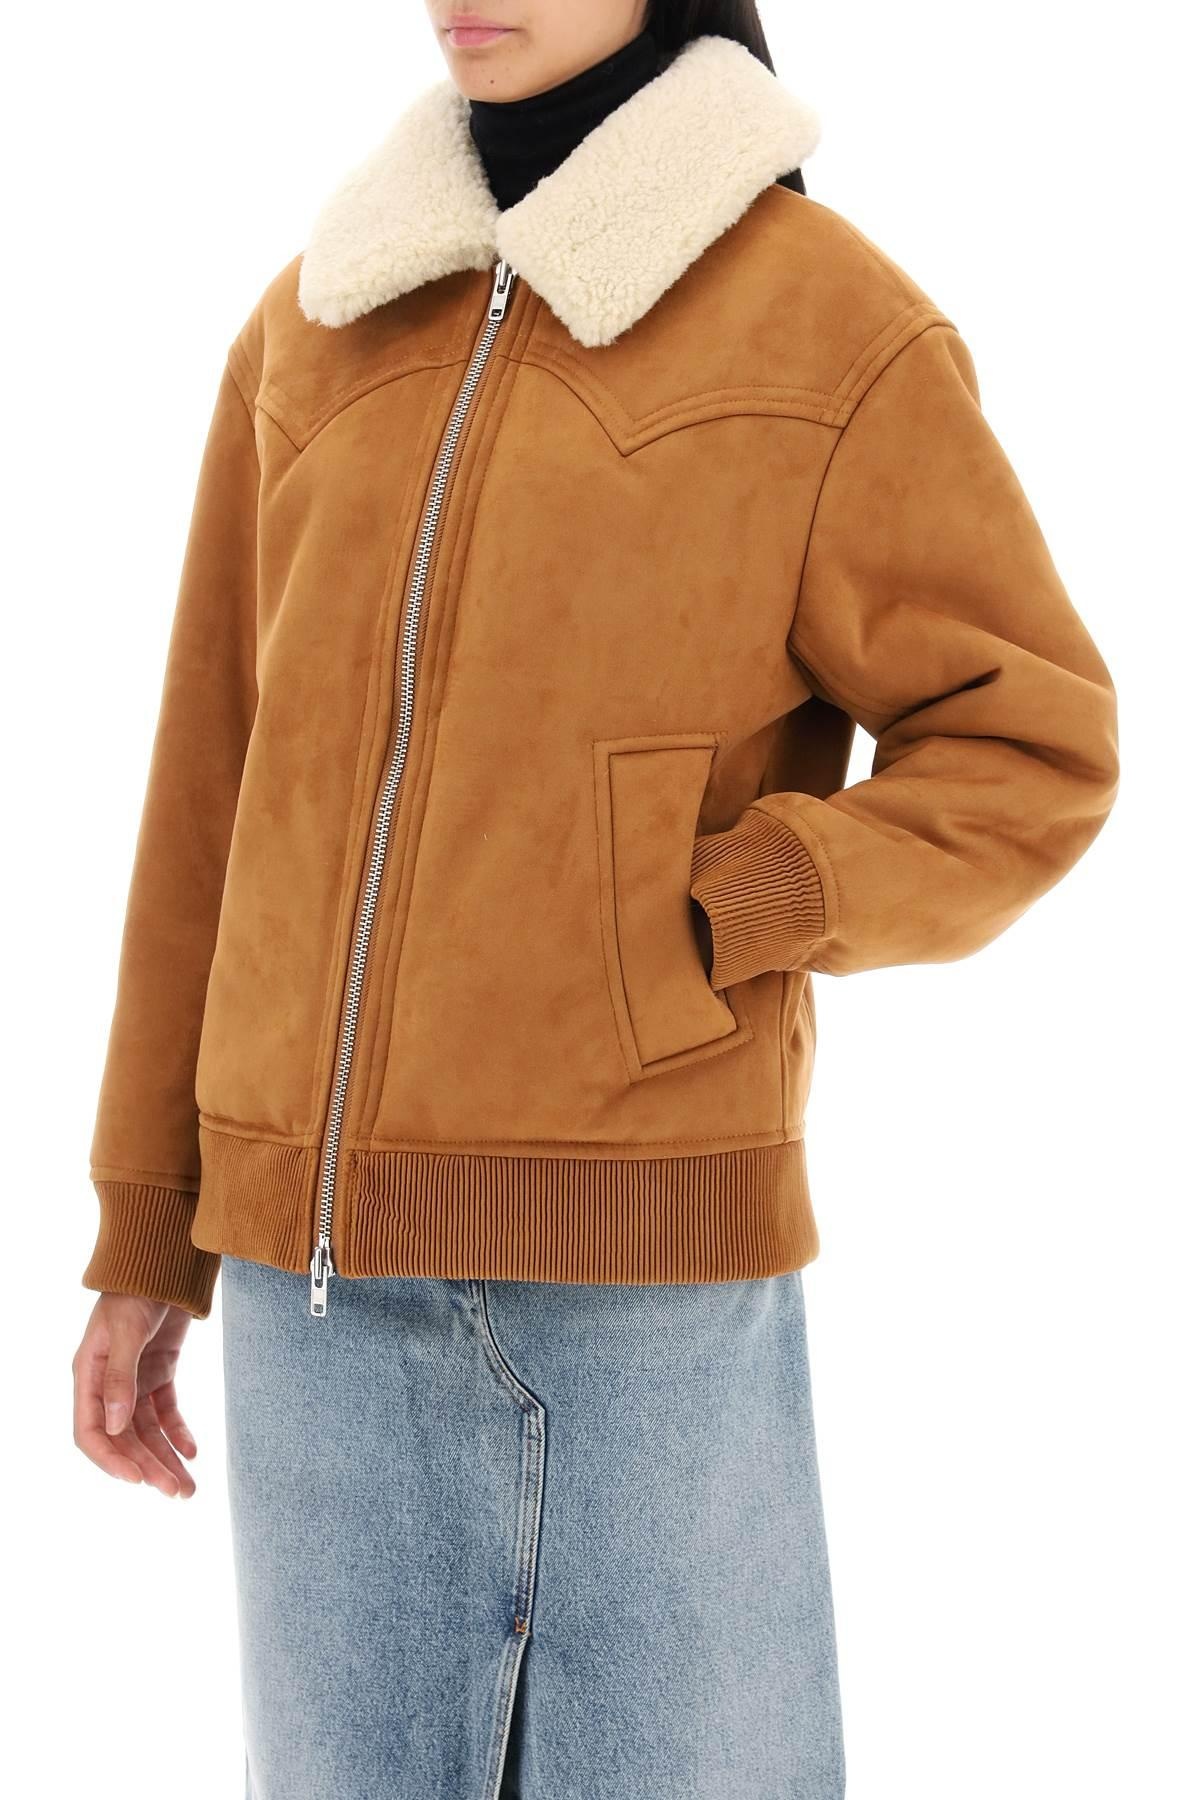 Stand Studio Lillee Eco Shearling Bomber Jacket - 5